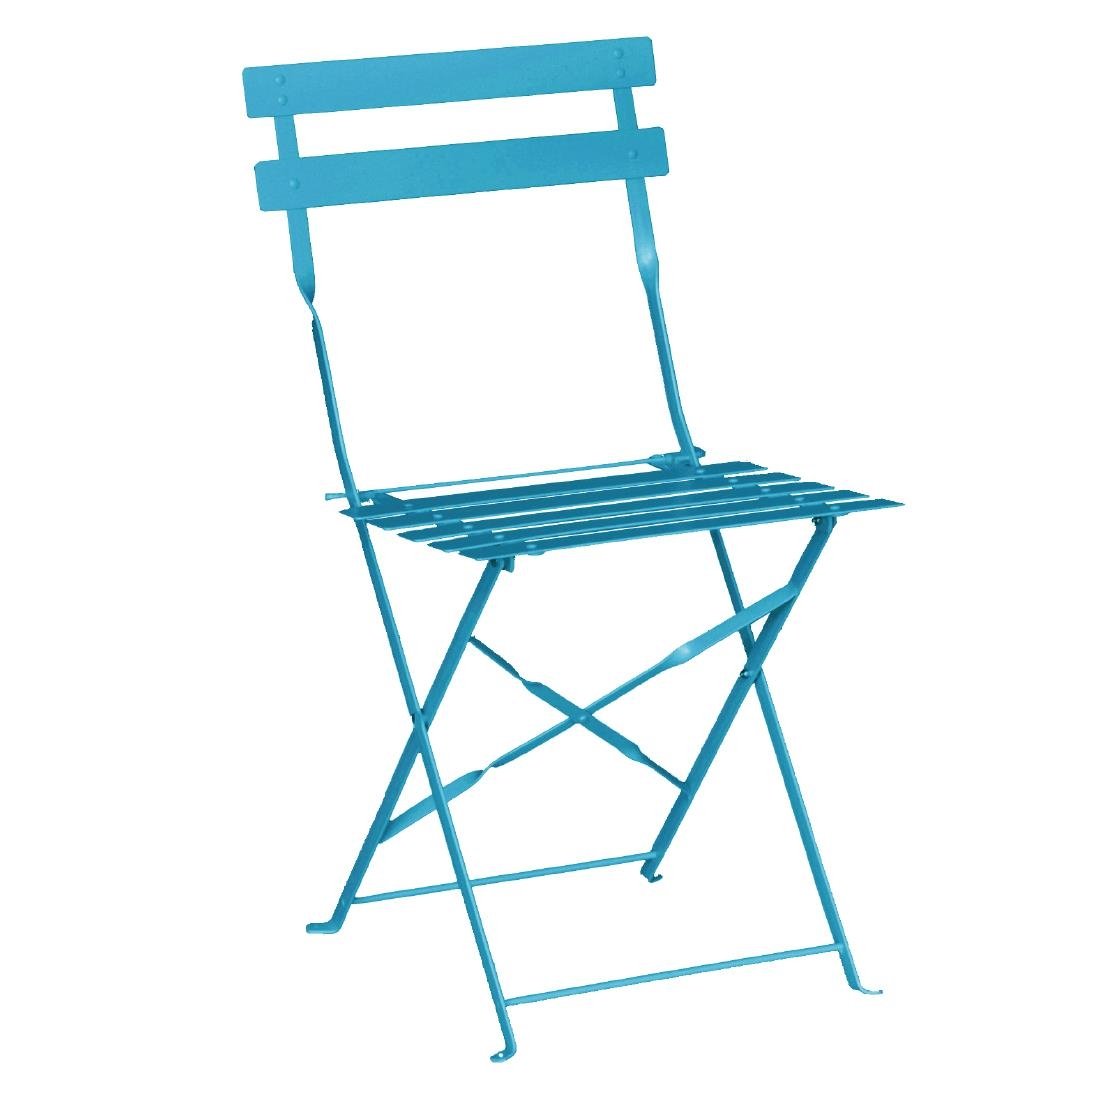 Bolero Pavement Style Steel Chairs Seaside Blue (Pack of 2) JD Catering Equipment Solutions Ltd